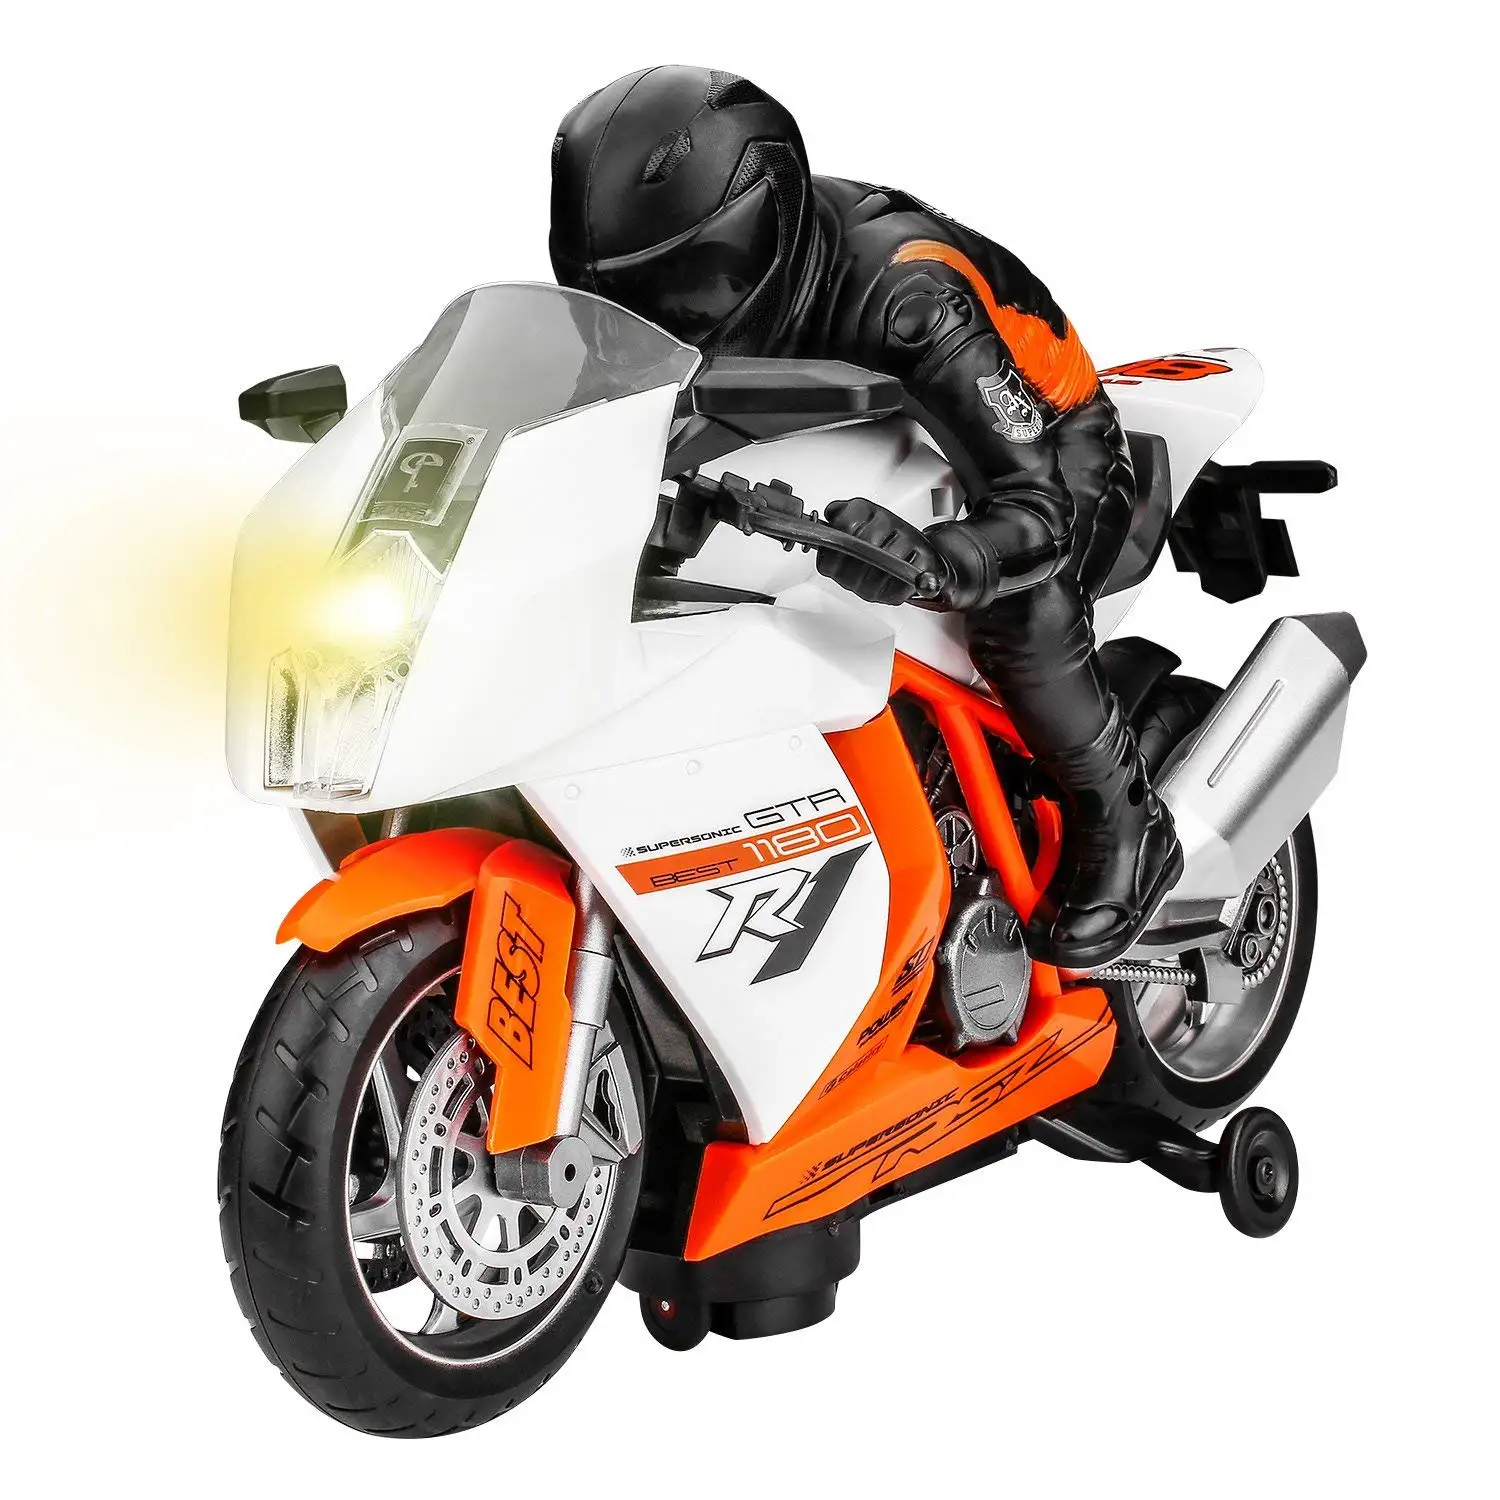 Cheap Bmw Toy Motorcycle, find Bmw Toy Motorcycle deals on line at Alibaba.com